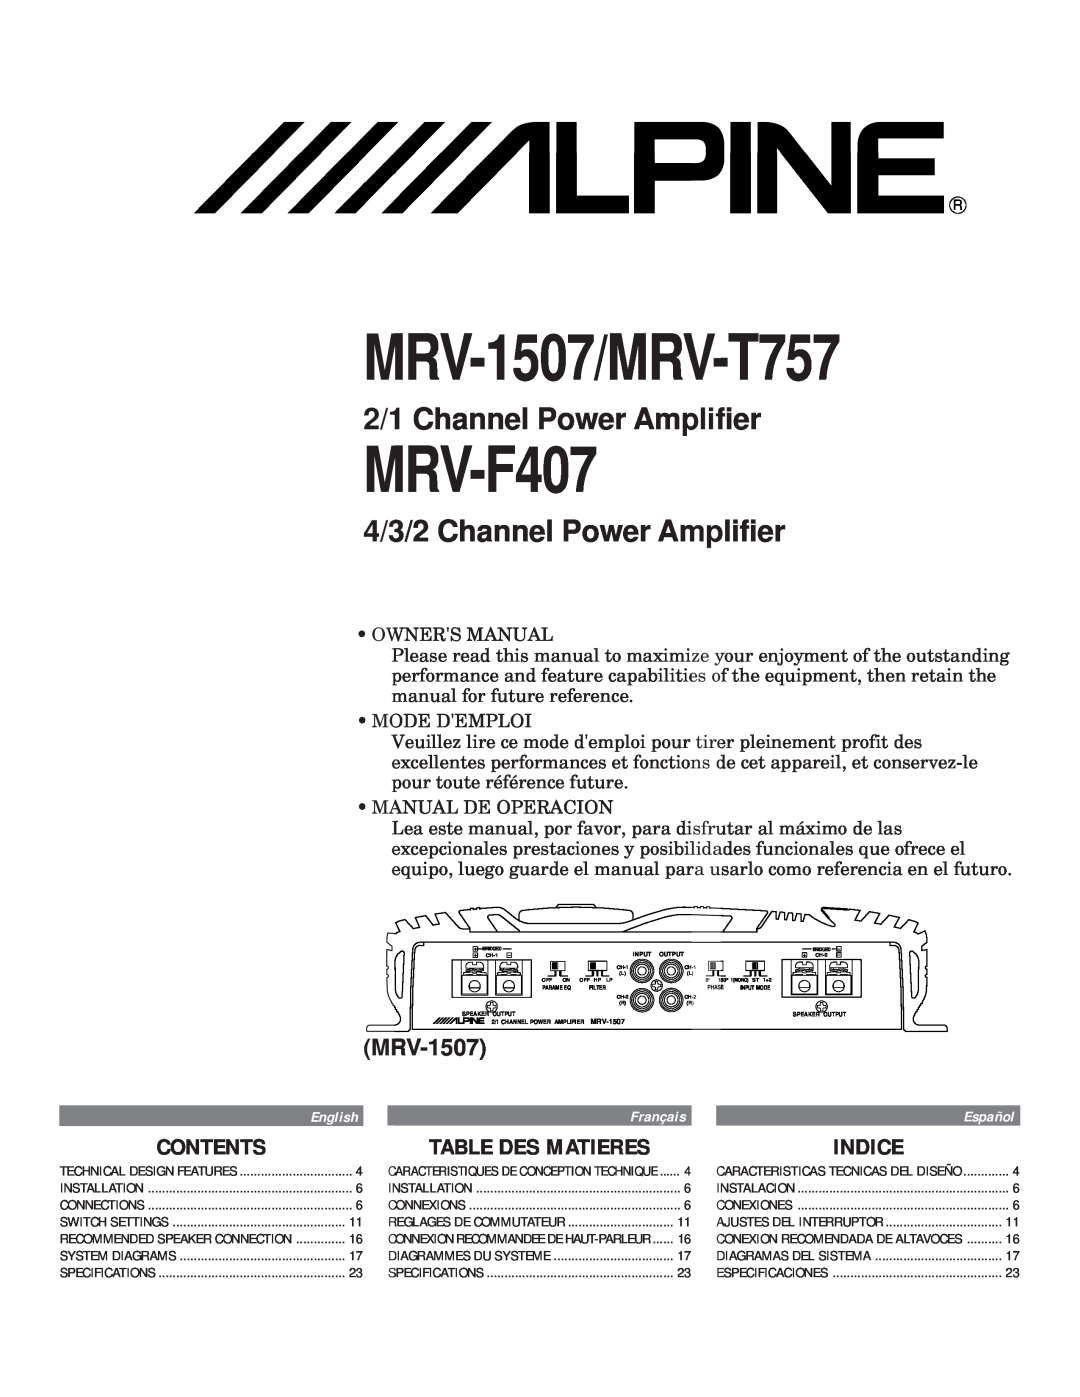 Alpine owner manual Contents, Indice, Table Des Matieres, MRV-1507/MRV-T757, MRV-F407, 2/1 Channel Power Amplifier 